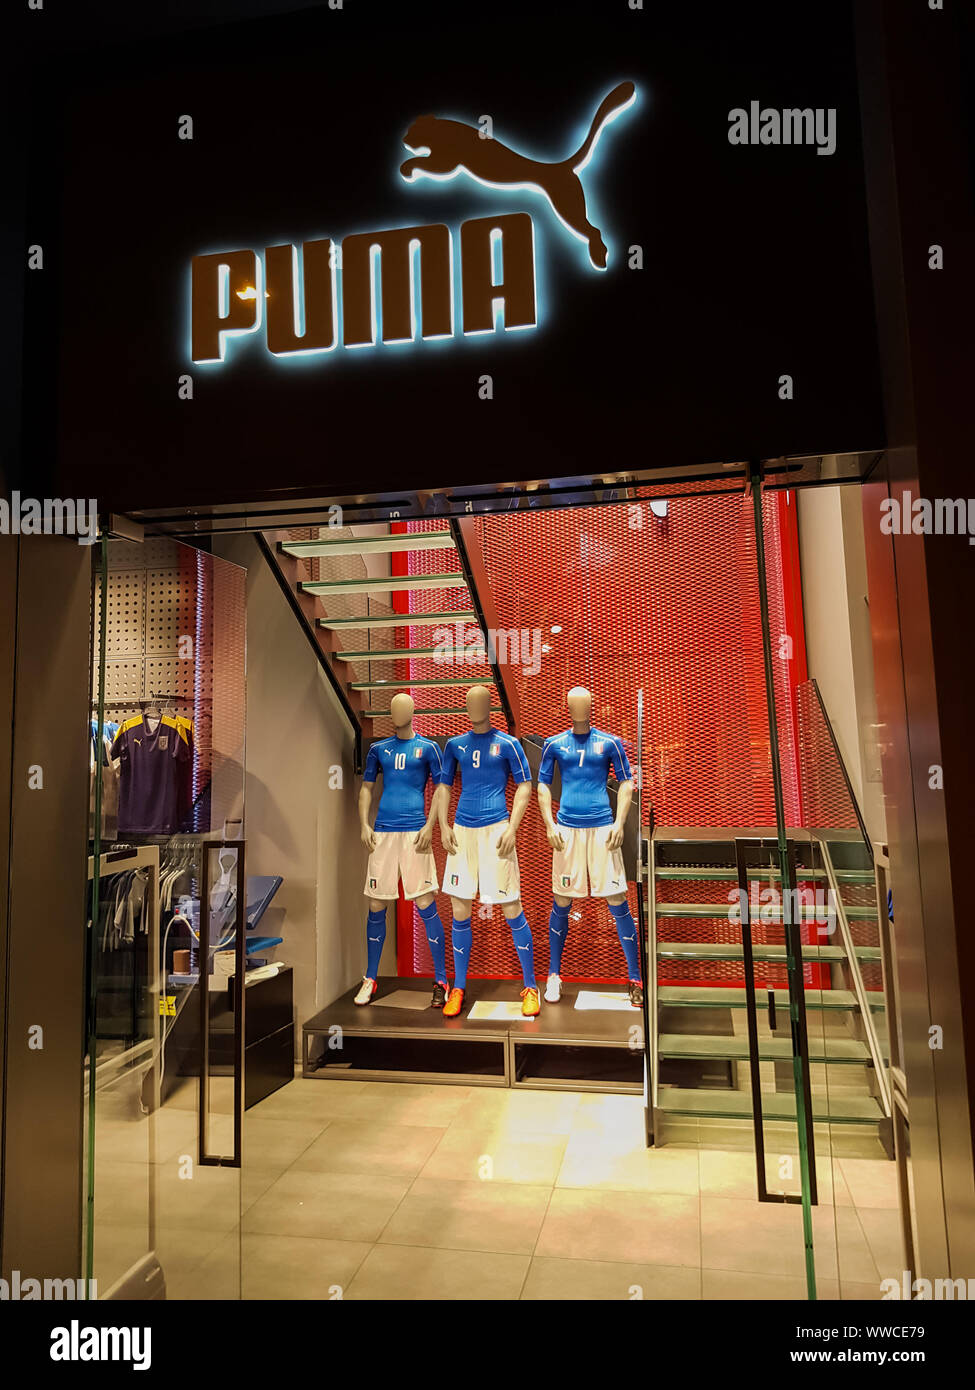 FLORENCE, ITALY - SEPTEMBER 18, 2016: Detail of the Puma store in Florence,  Italy. It is European multinational company for forathletic and casual foo  Stock Photo - Alamy